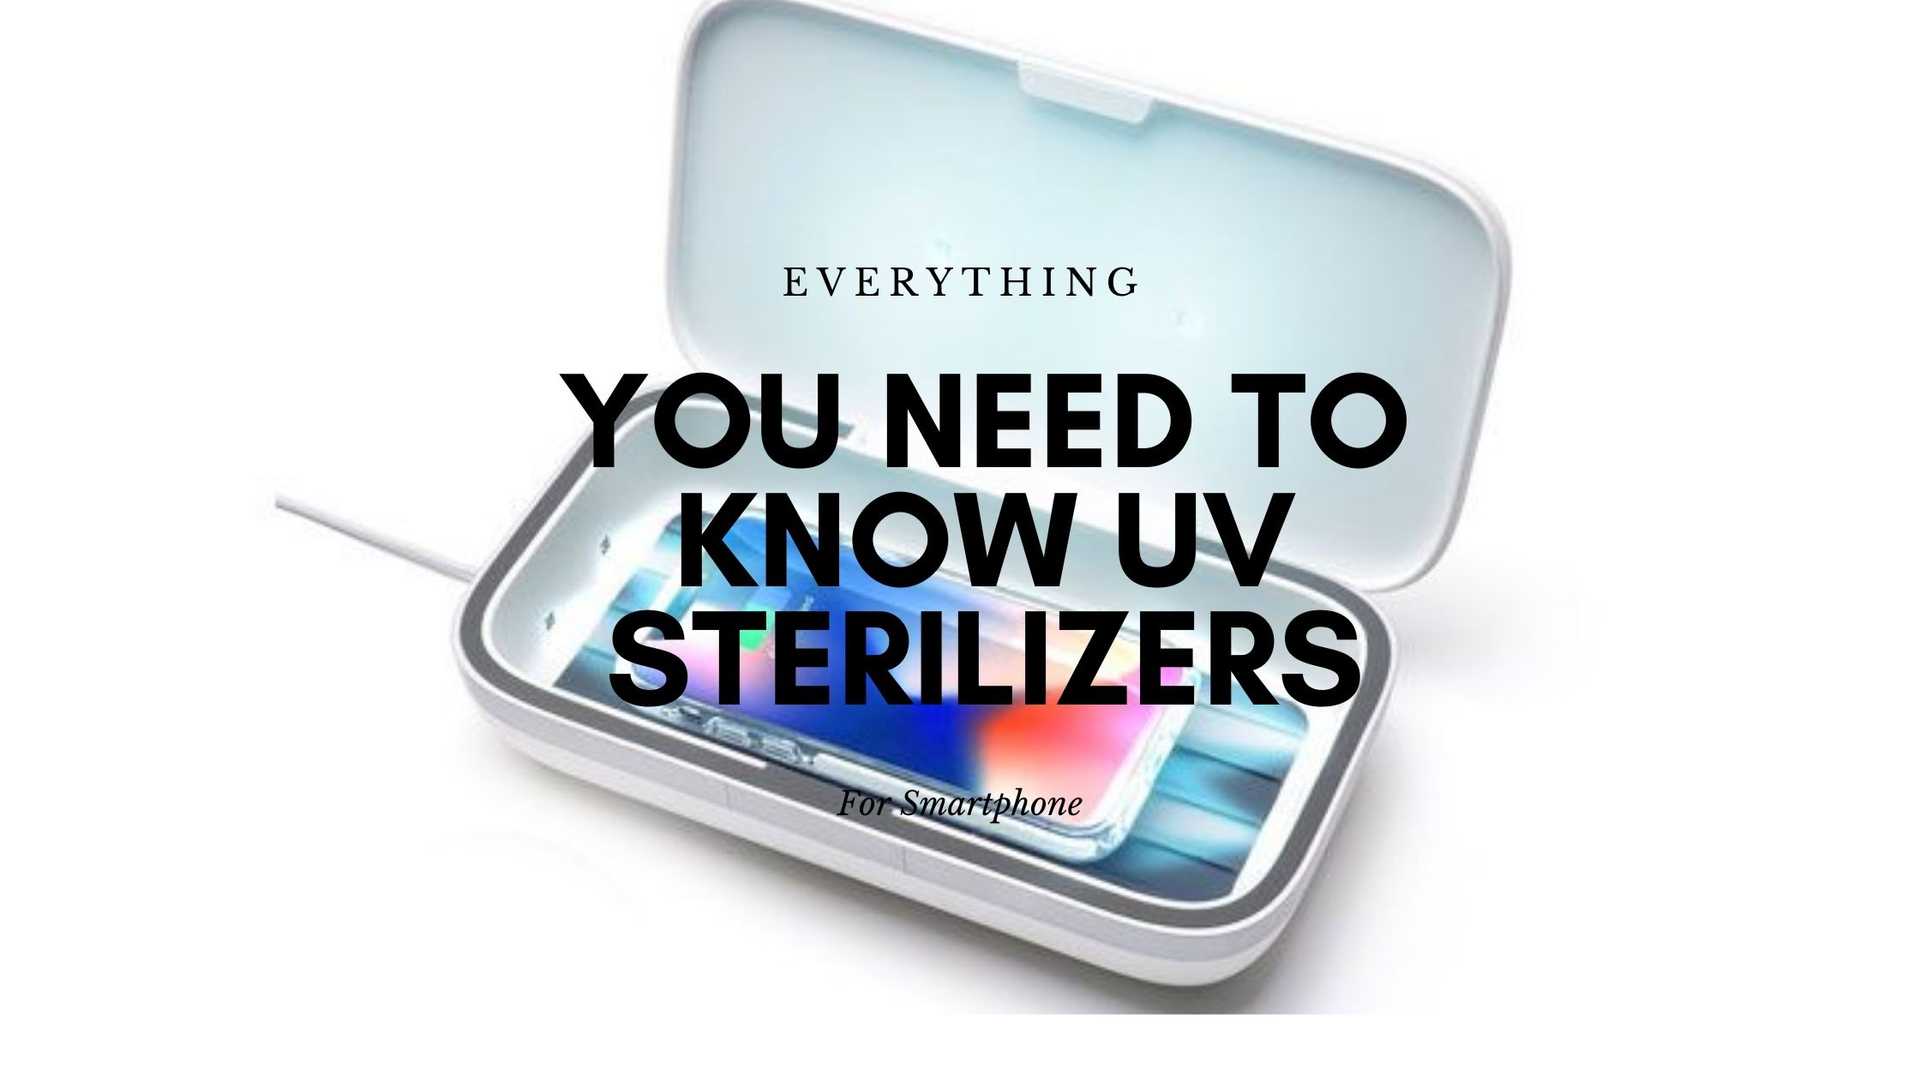 Everything You Need to Know About UV Sterilizers for Smartphone